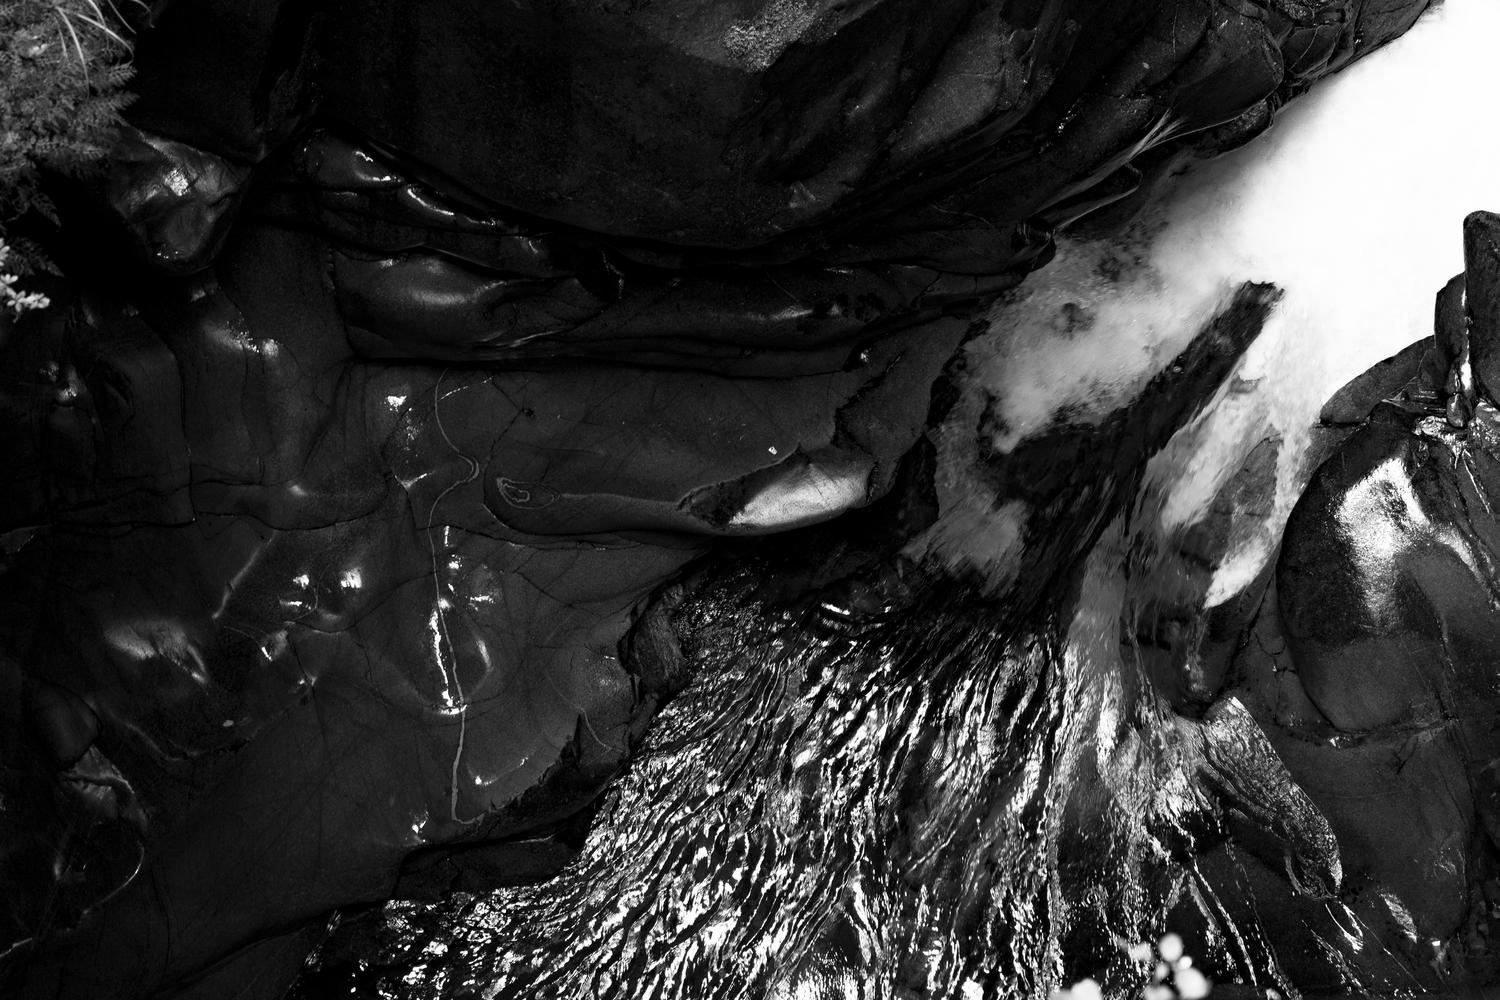 b&w photo showing folding shapes of fabric or lava on dark background